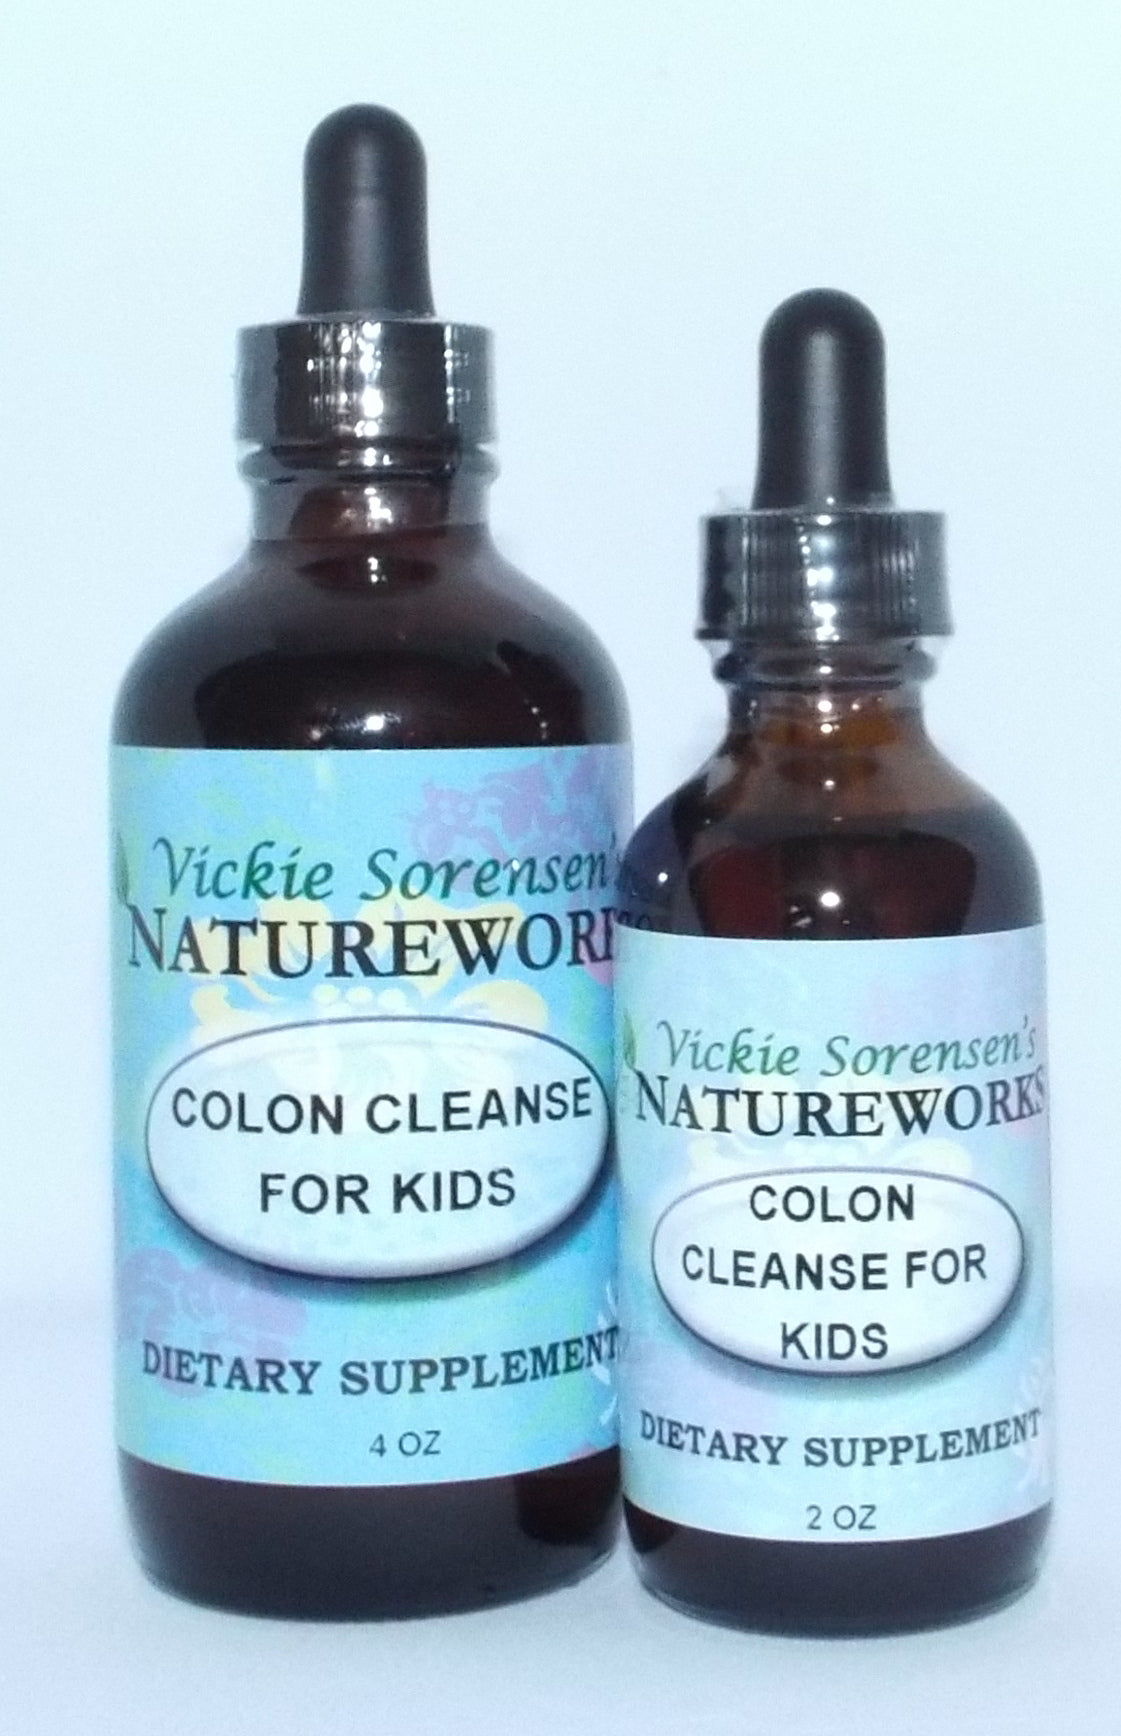 Colon Cleanse for Kids